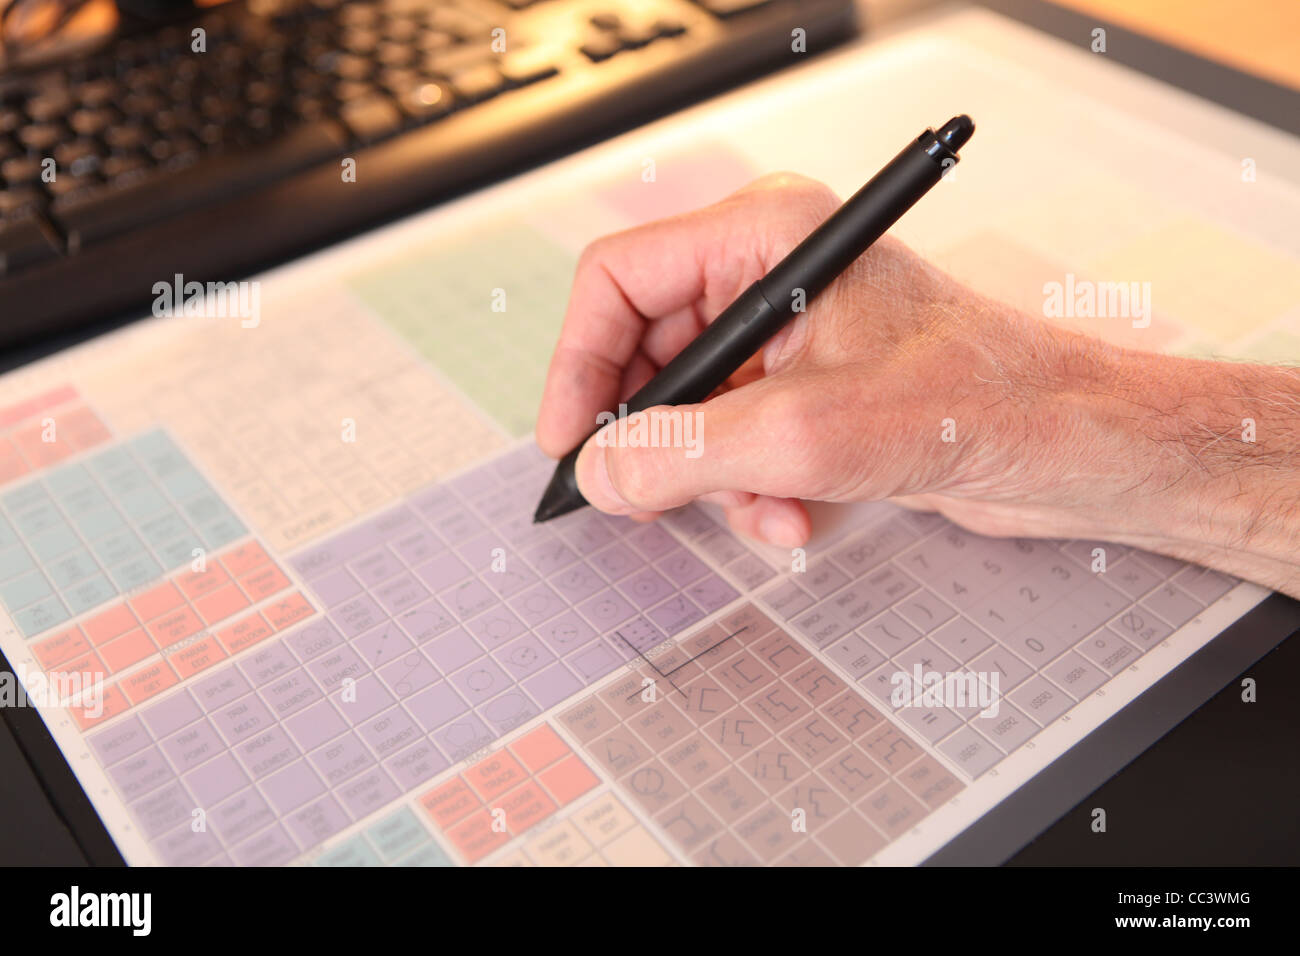 ARCHITECT WORKING ON CAD TABLET Stock Photo